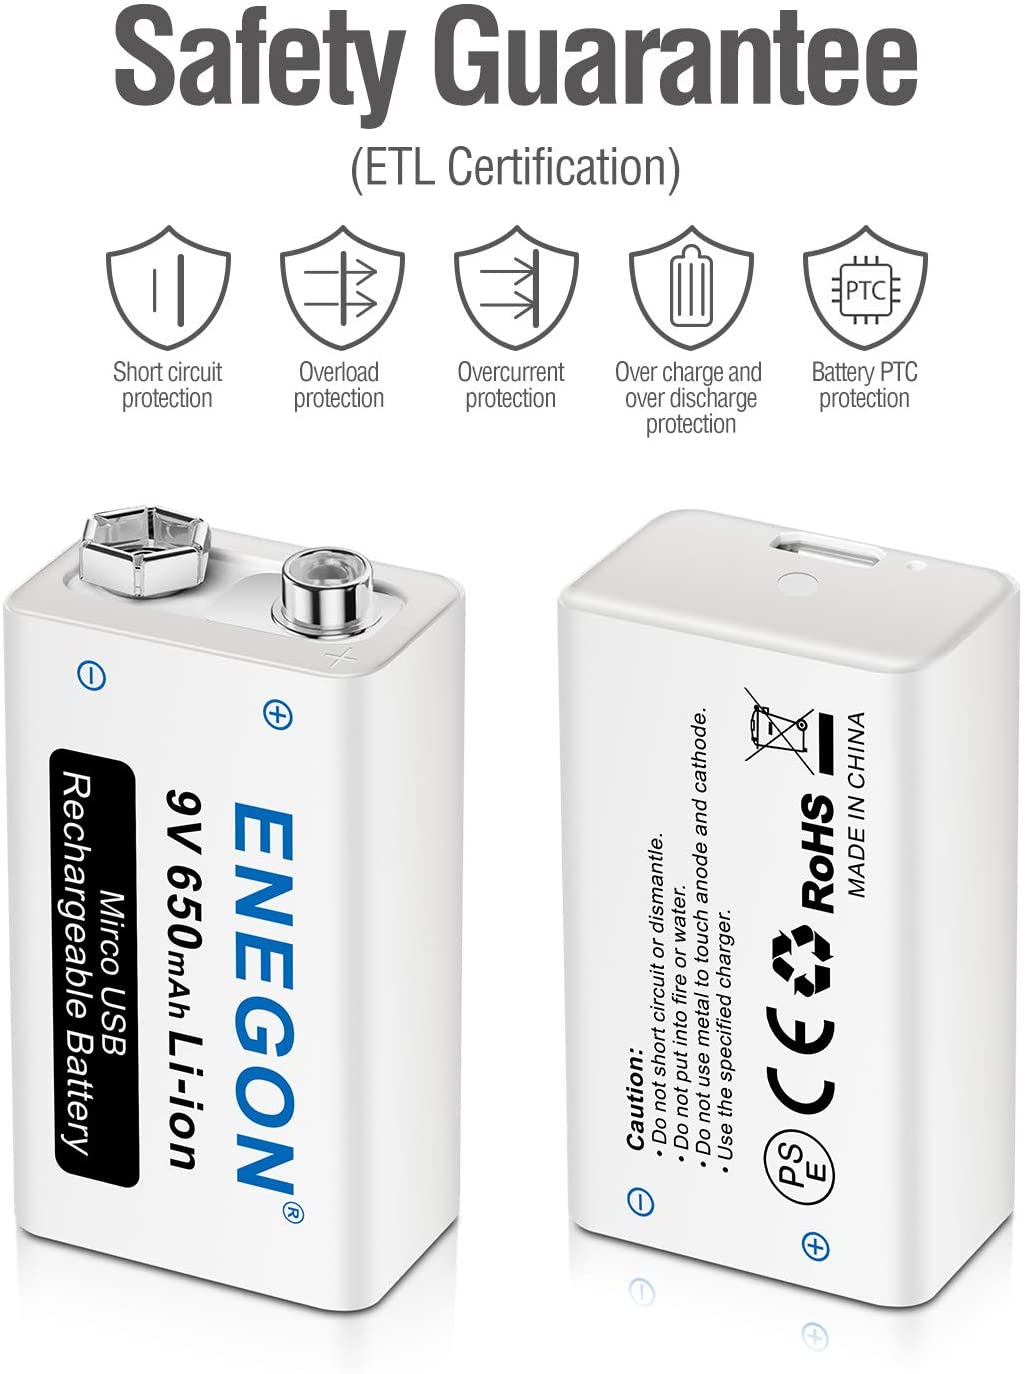 USB 9V Rechargeable Battery 650 mAh Capacity,Square Lithium 9 Vlot  Batteries with Type C Port Cable 4 Pack